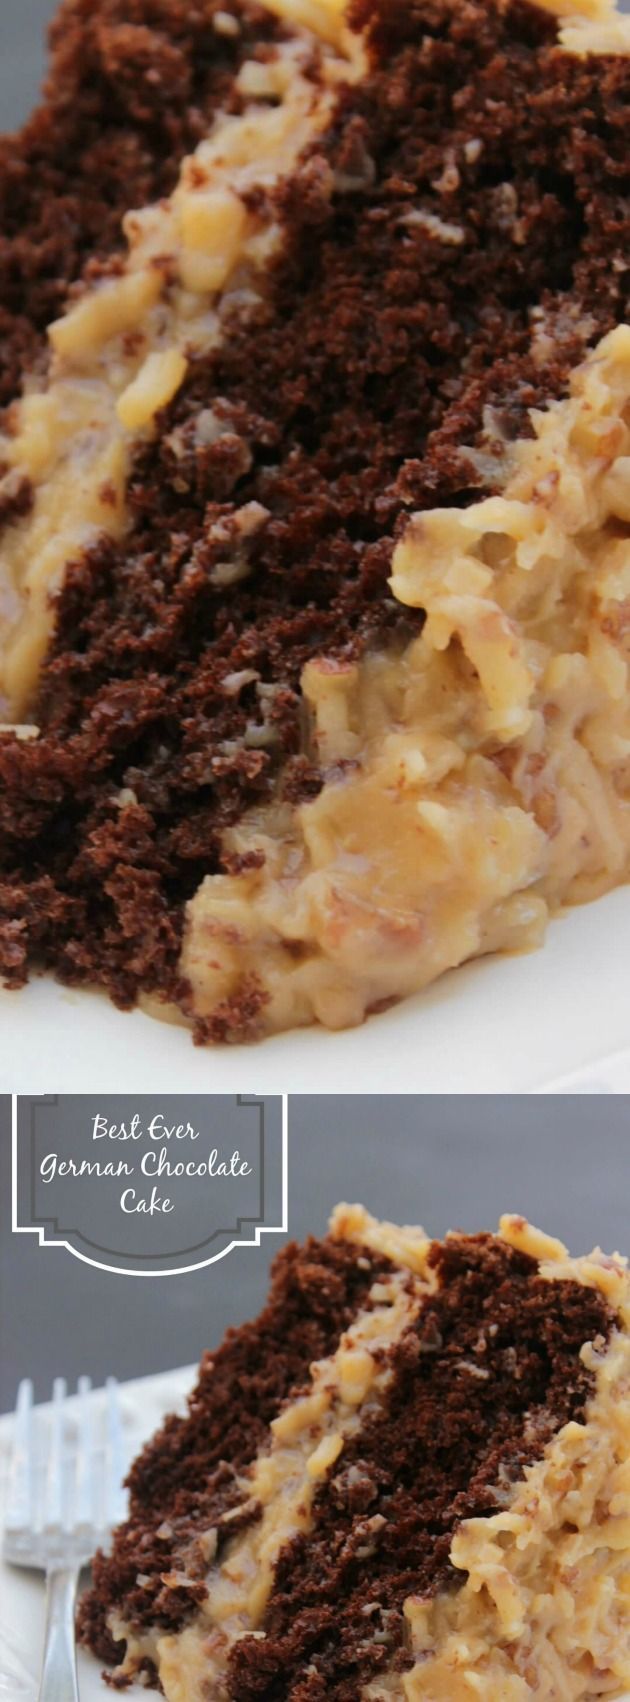 This Best Ever German Chocolate Cake from Sandra over at A Dash of Sanity just might be the BEST German Chocolate Cake we’ve